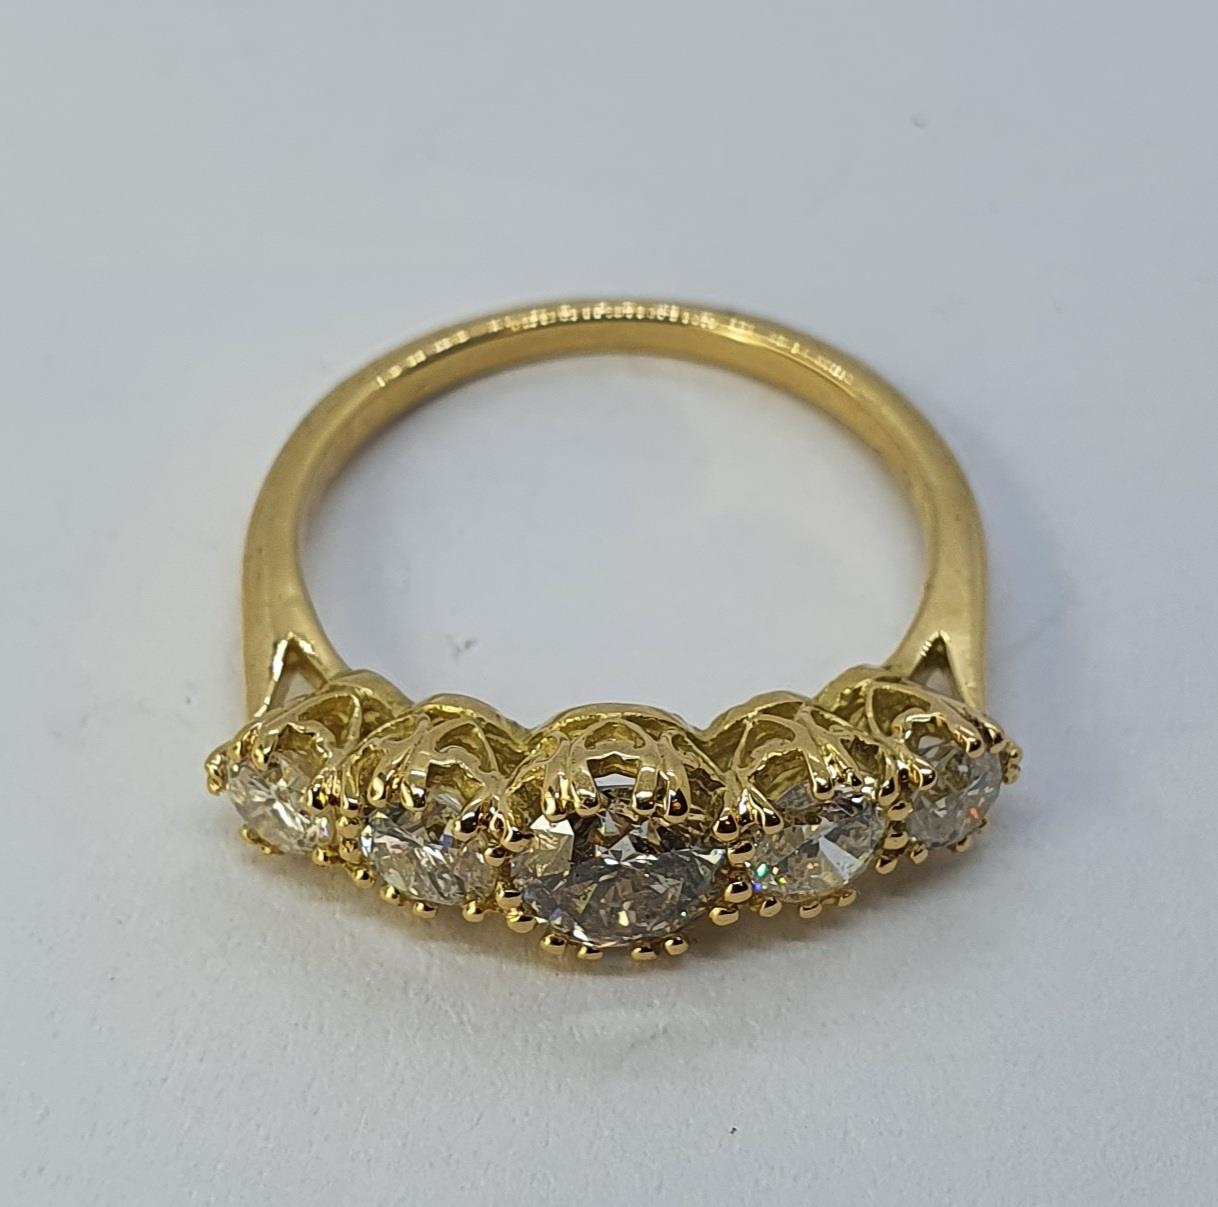 An 18ct gold and five stone diamond ring, ring size K Diamond weight 1.59ct approx. with the - Image 3 of 4